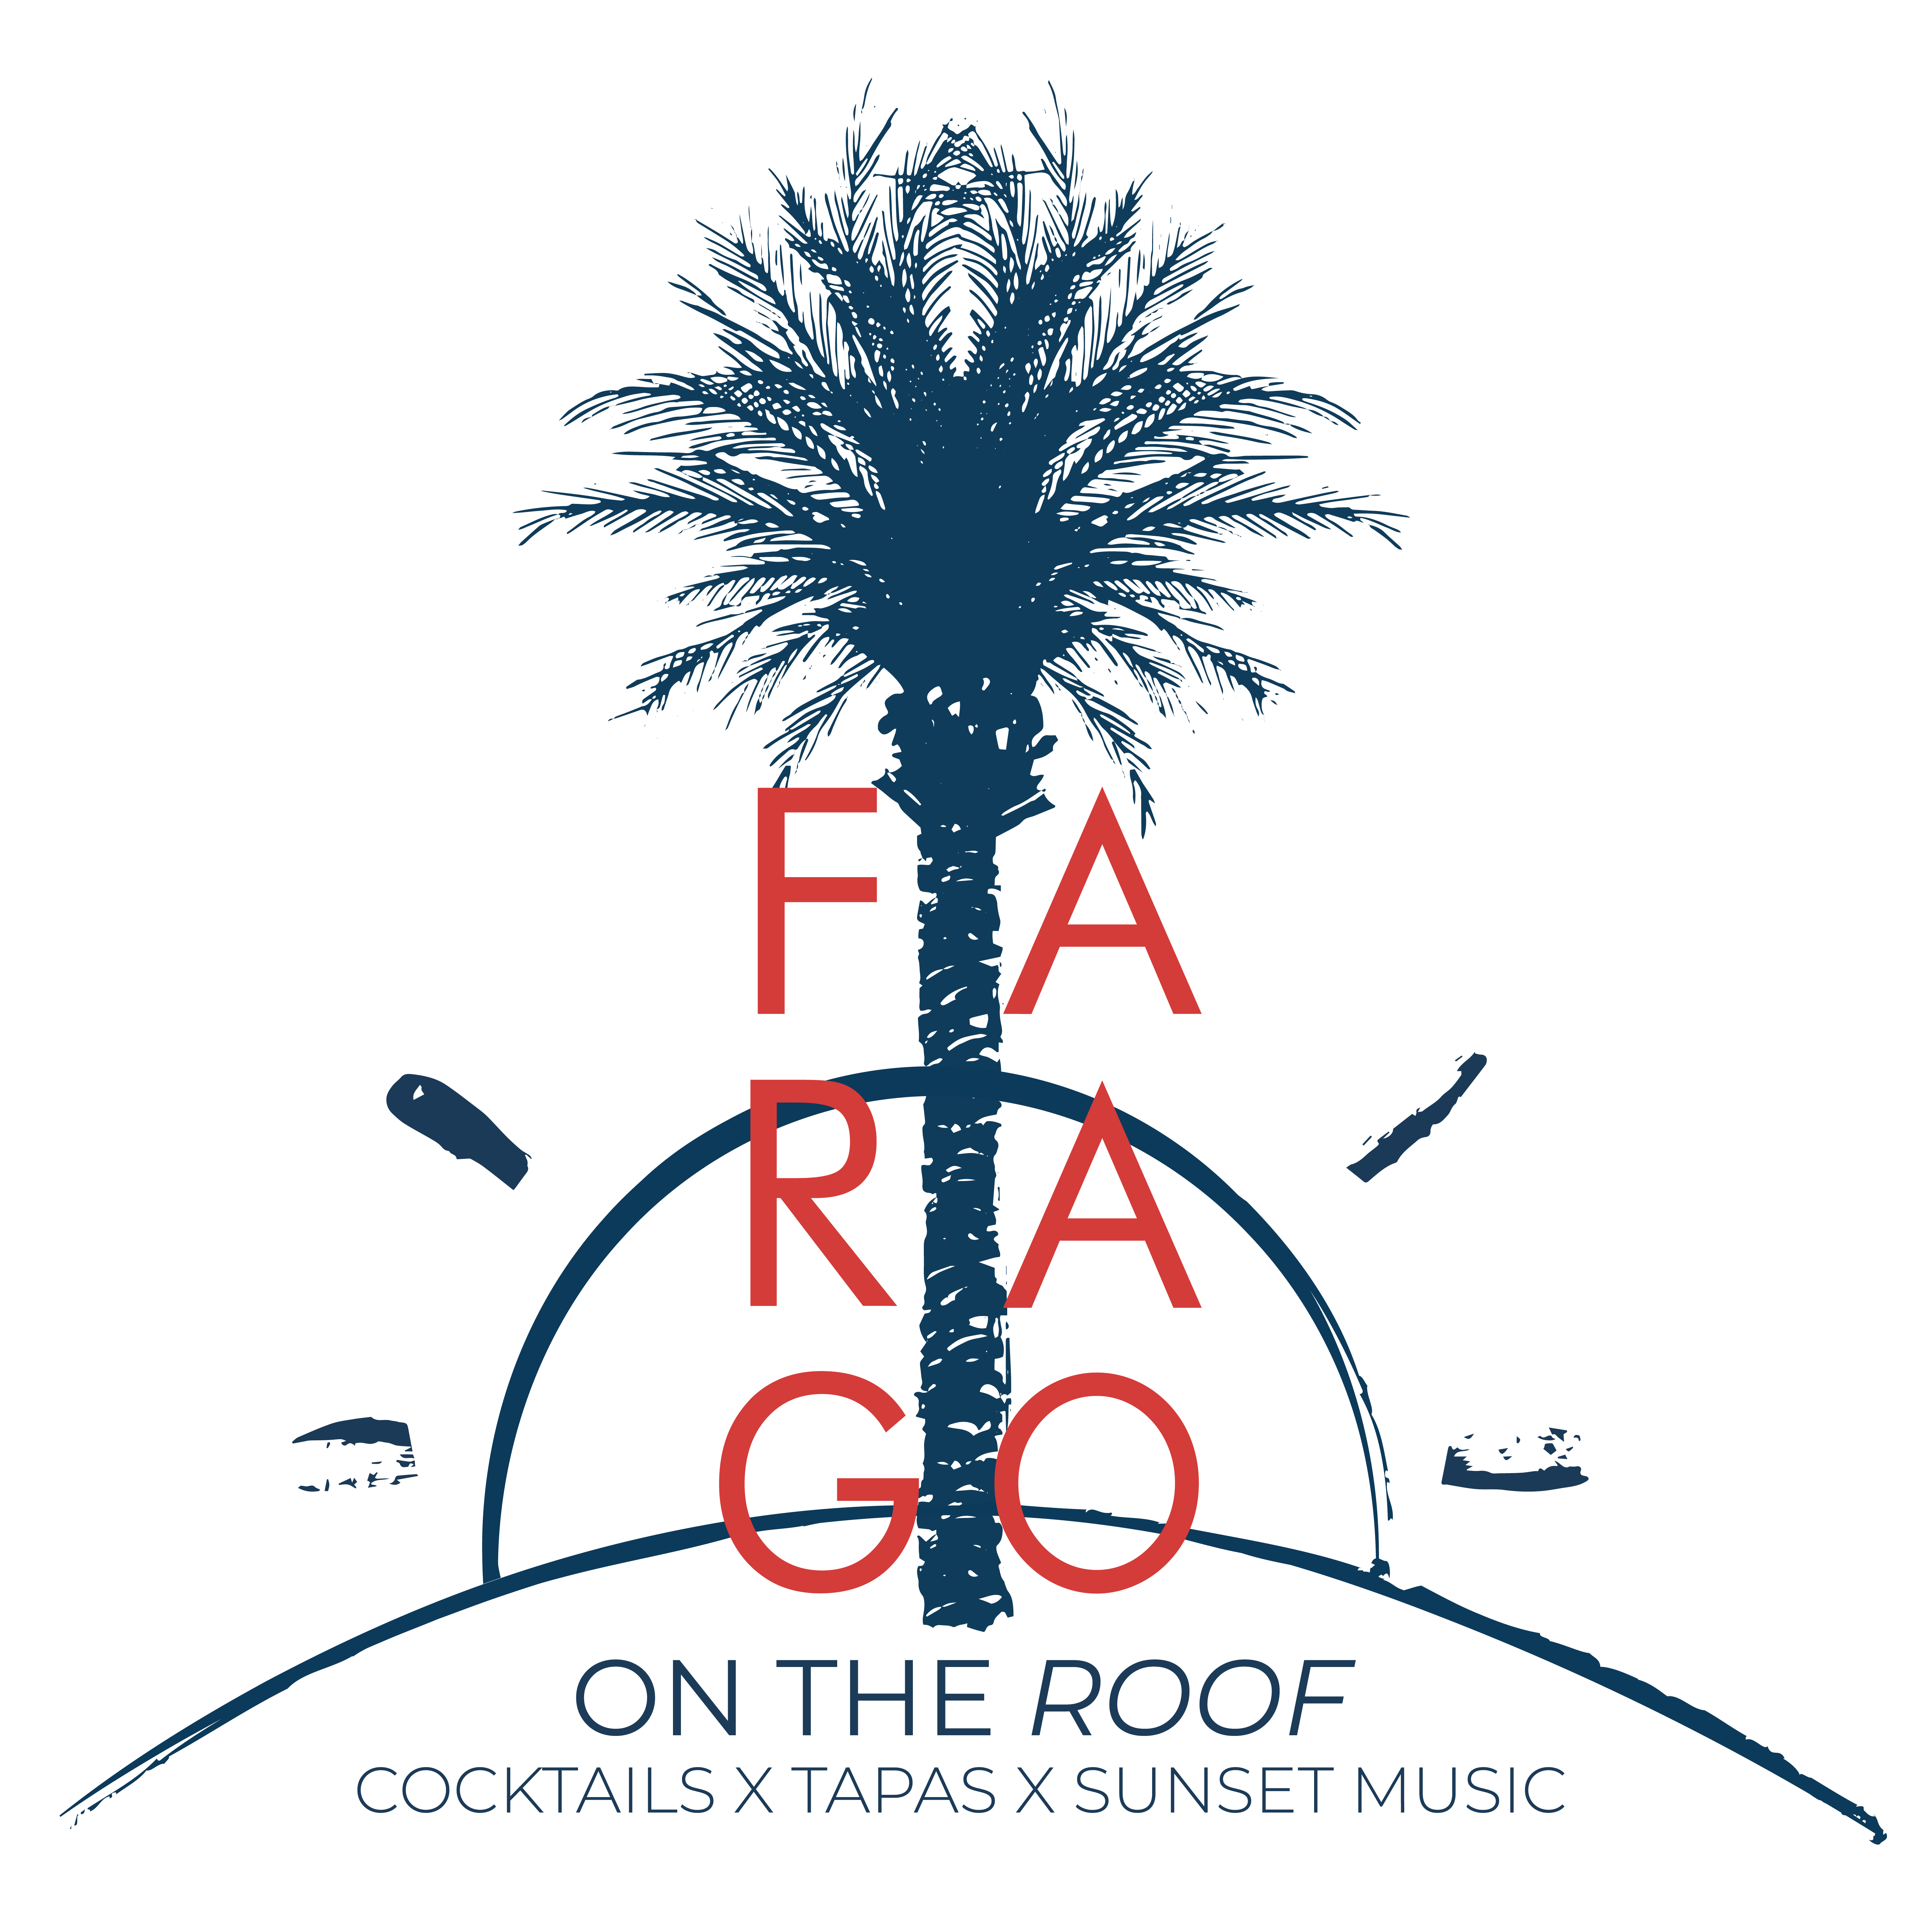 Farago on the roof